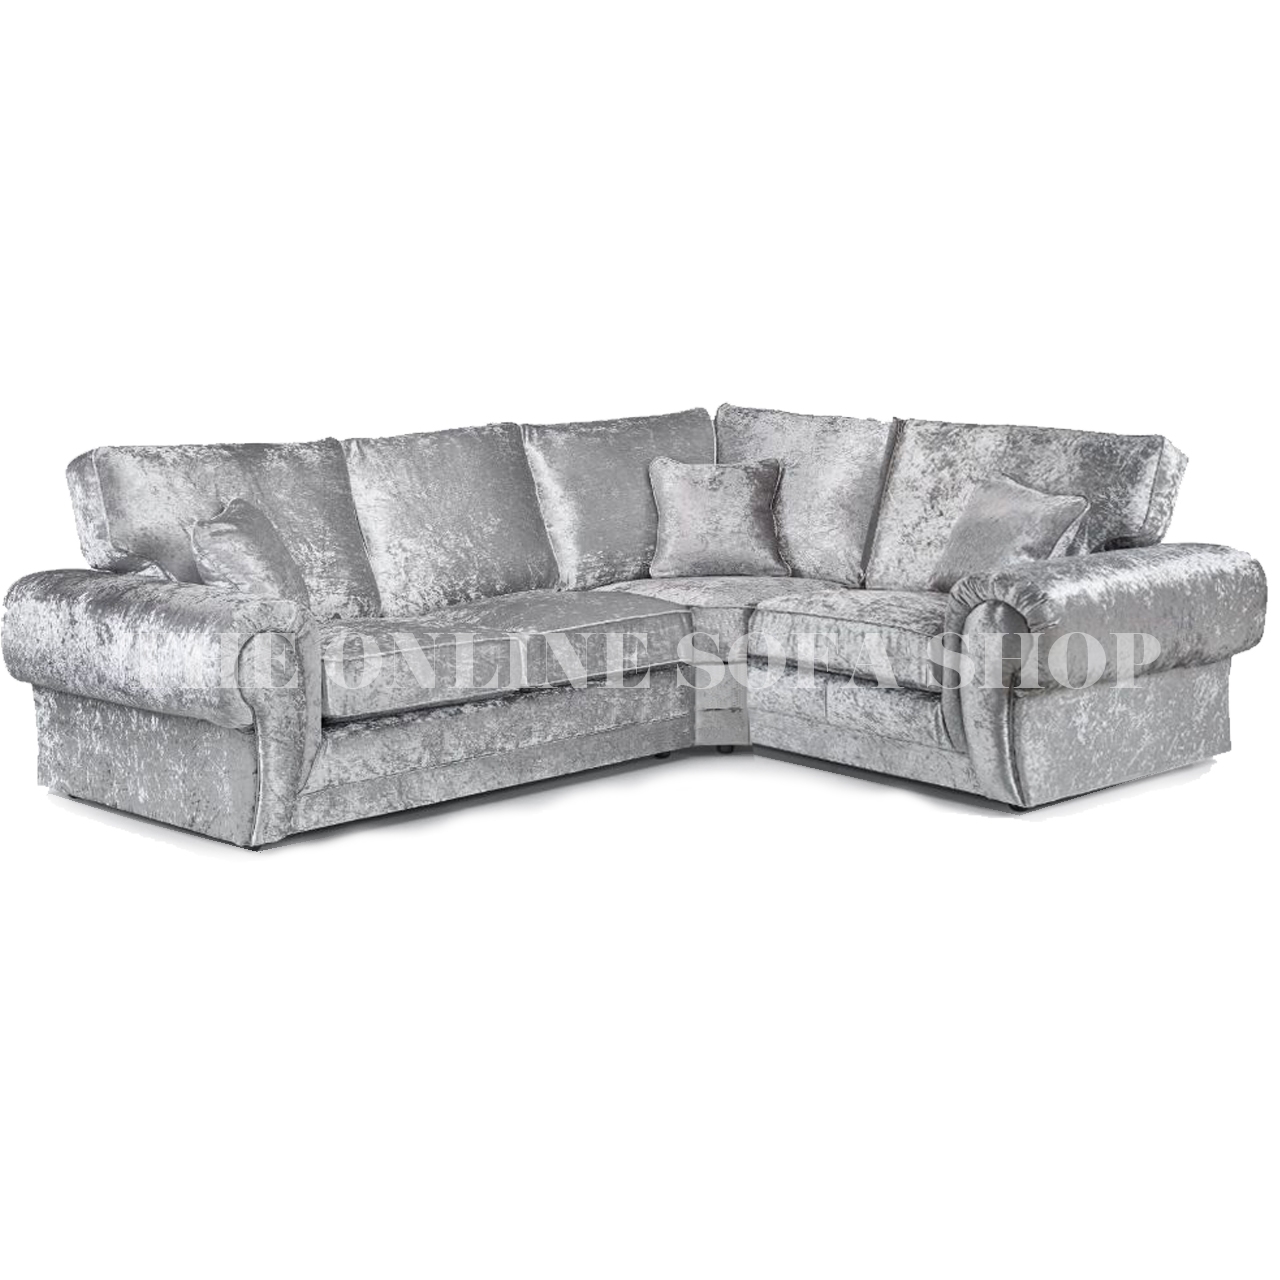 Chelsea Crushed Velvet 4 Seater Corner Sofa – Silver – Right Hand Facing – The Online Sofa Shop